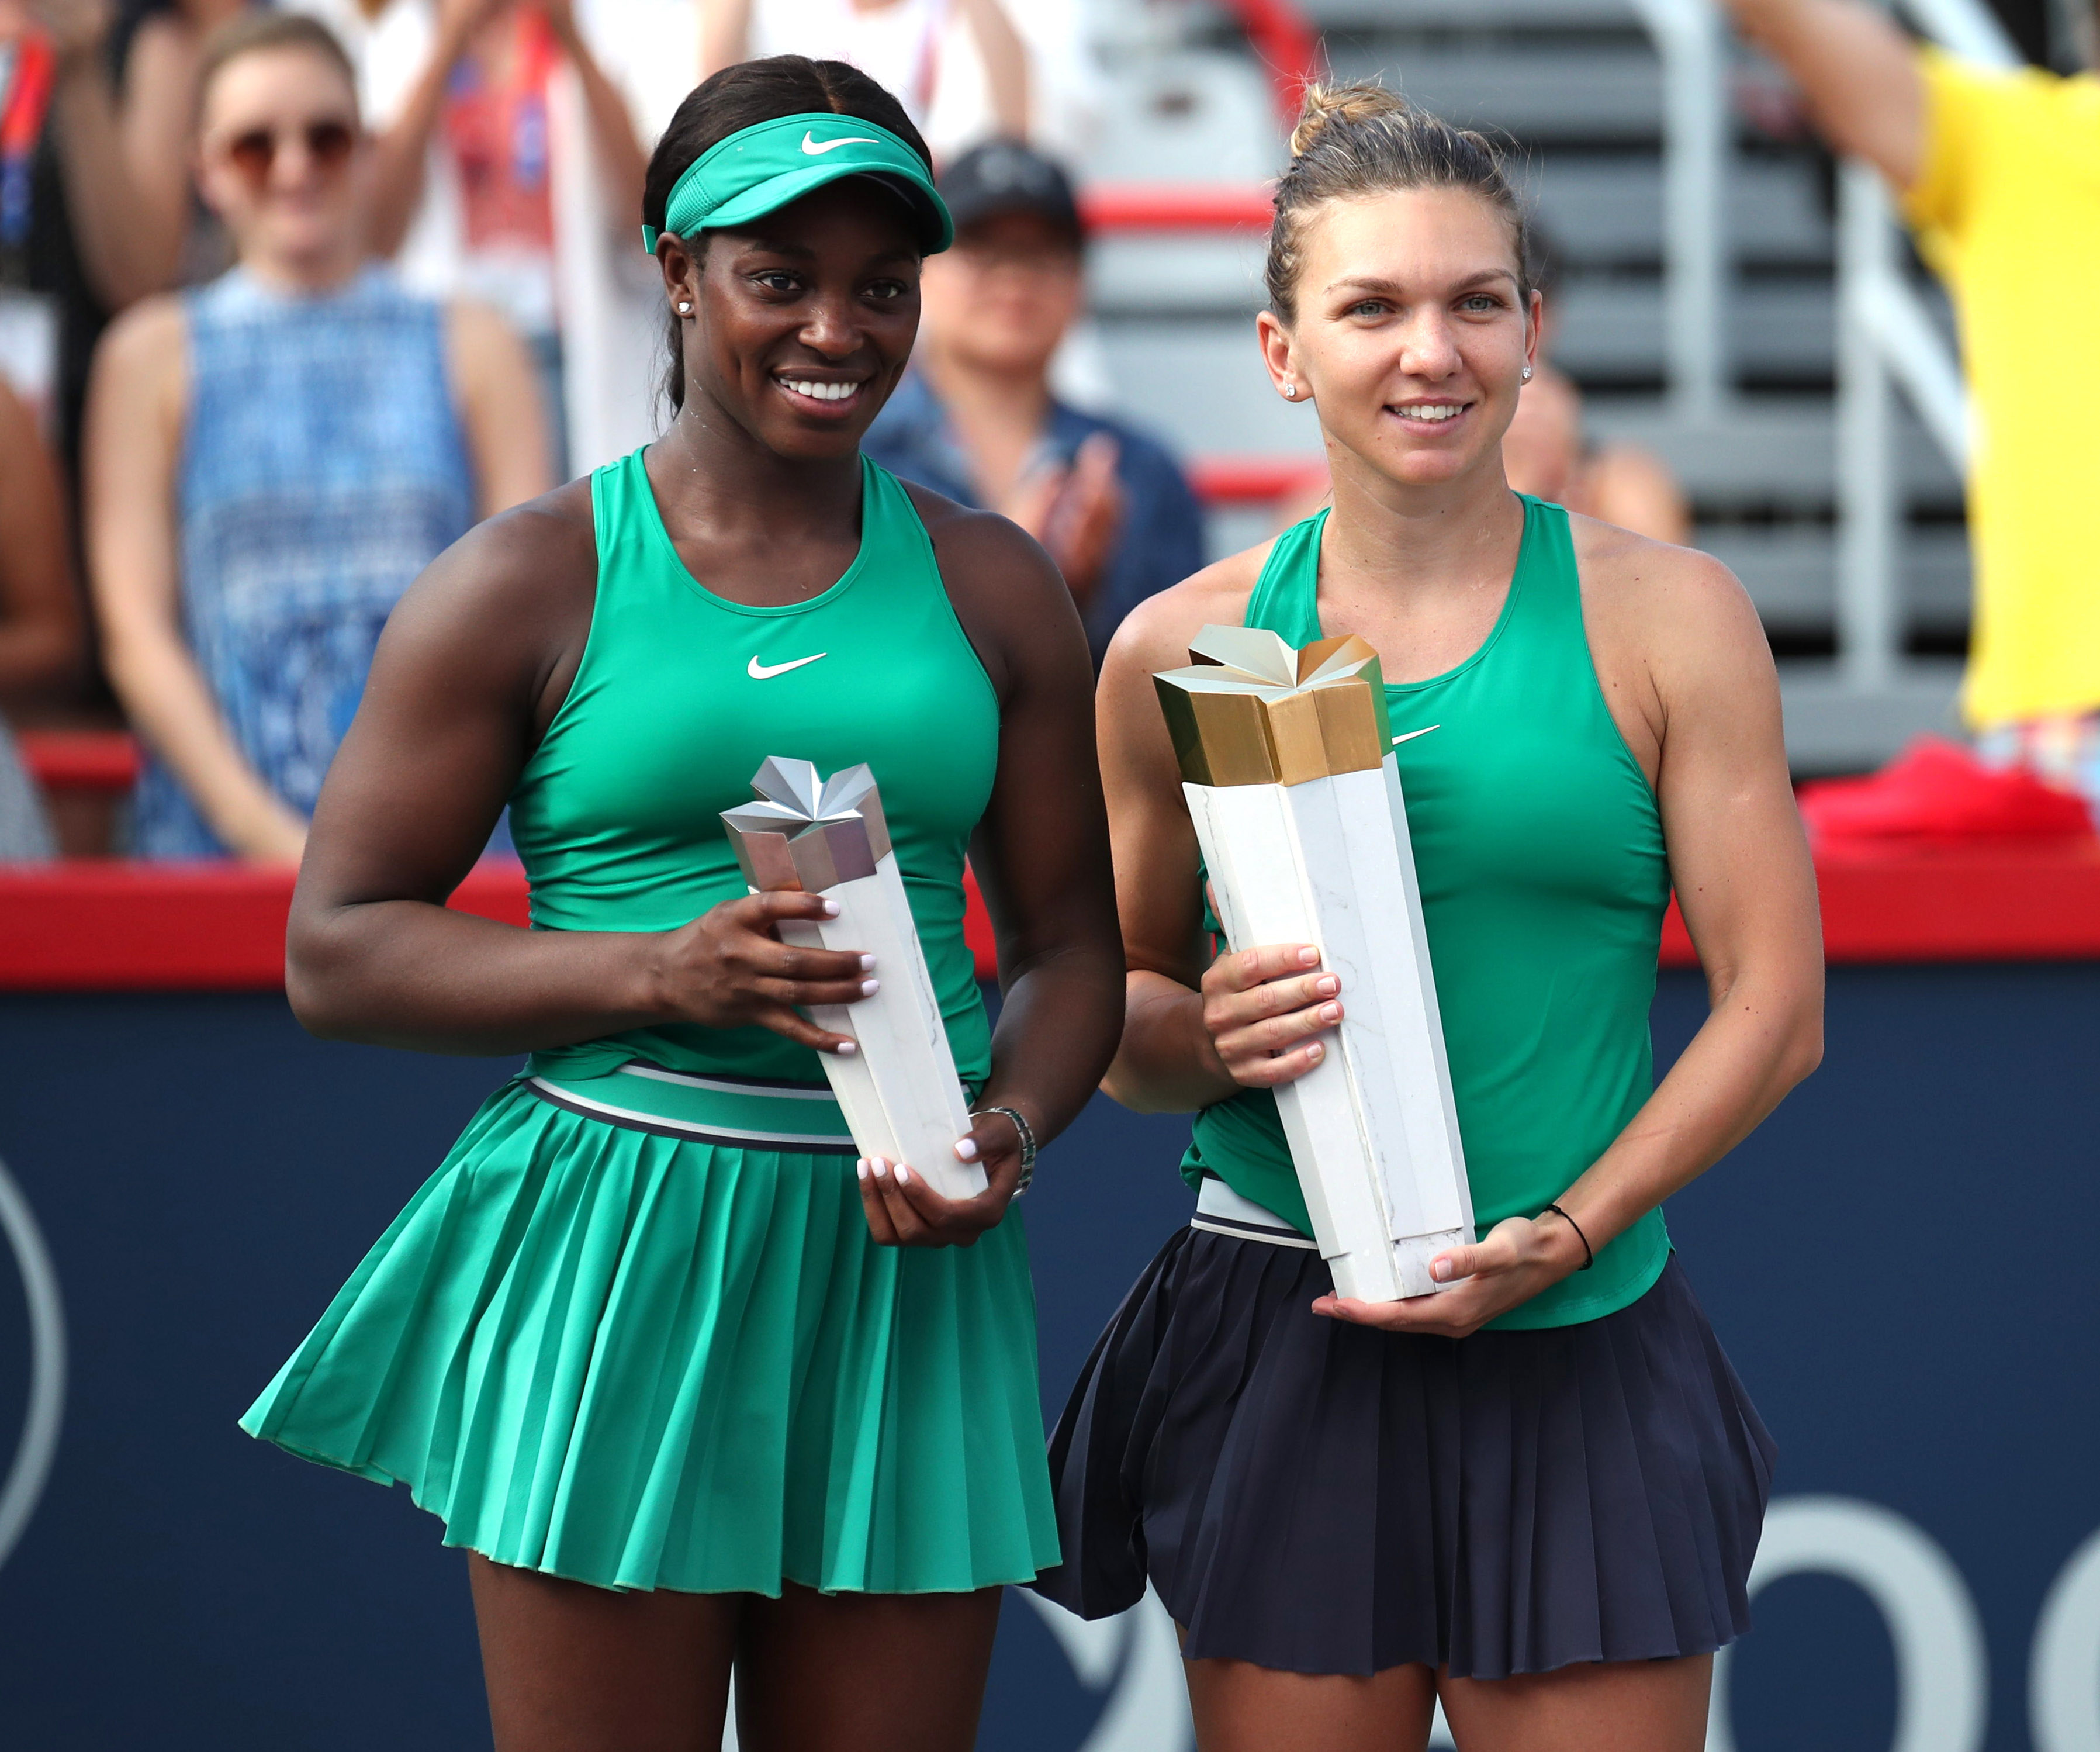 Tennis: Halep beats Stephens in repeat of French Open win